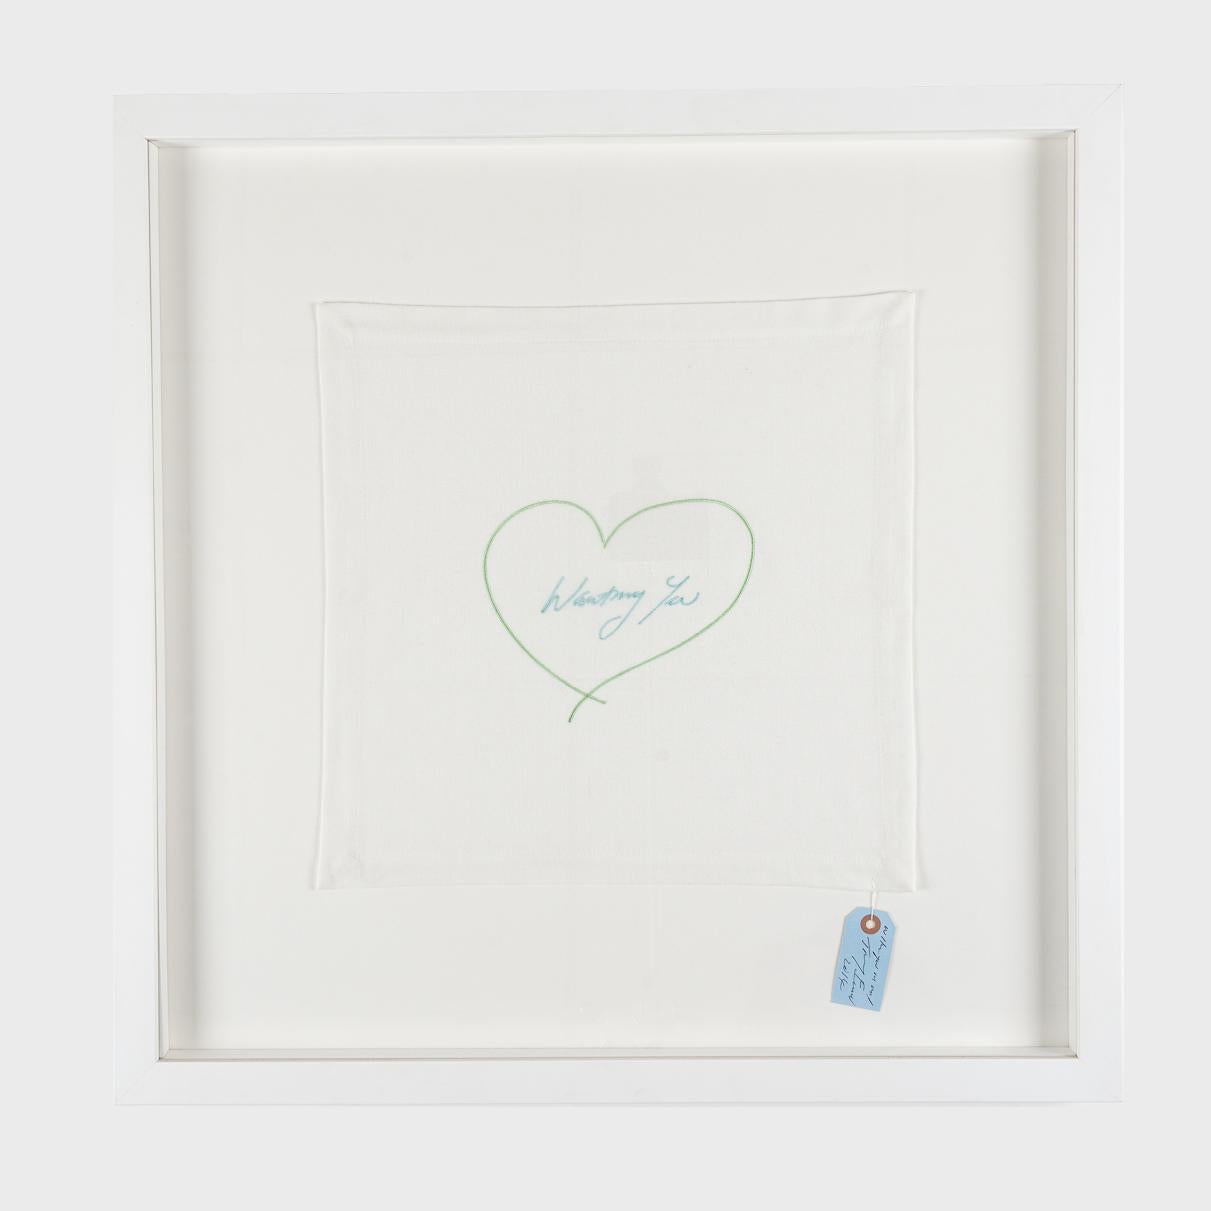 Wanting You, Napkin (Green and Blue)